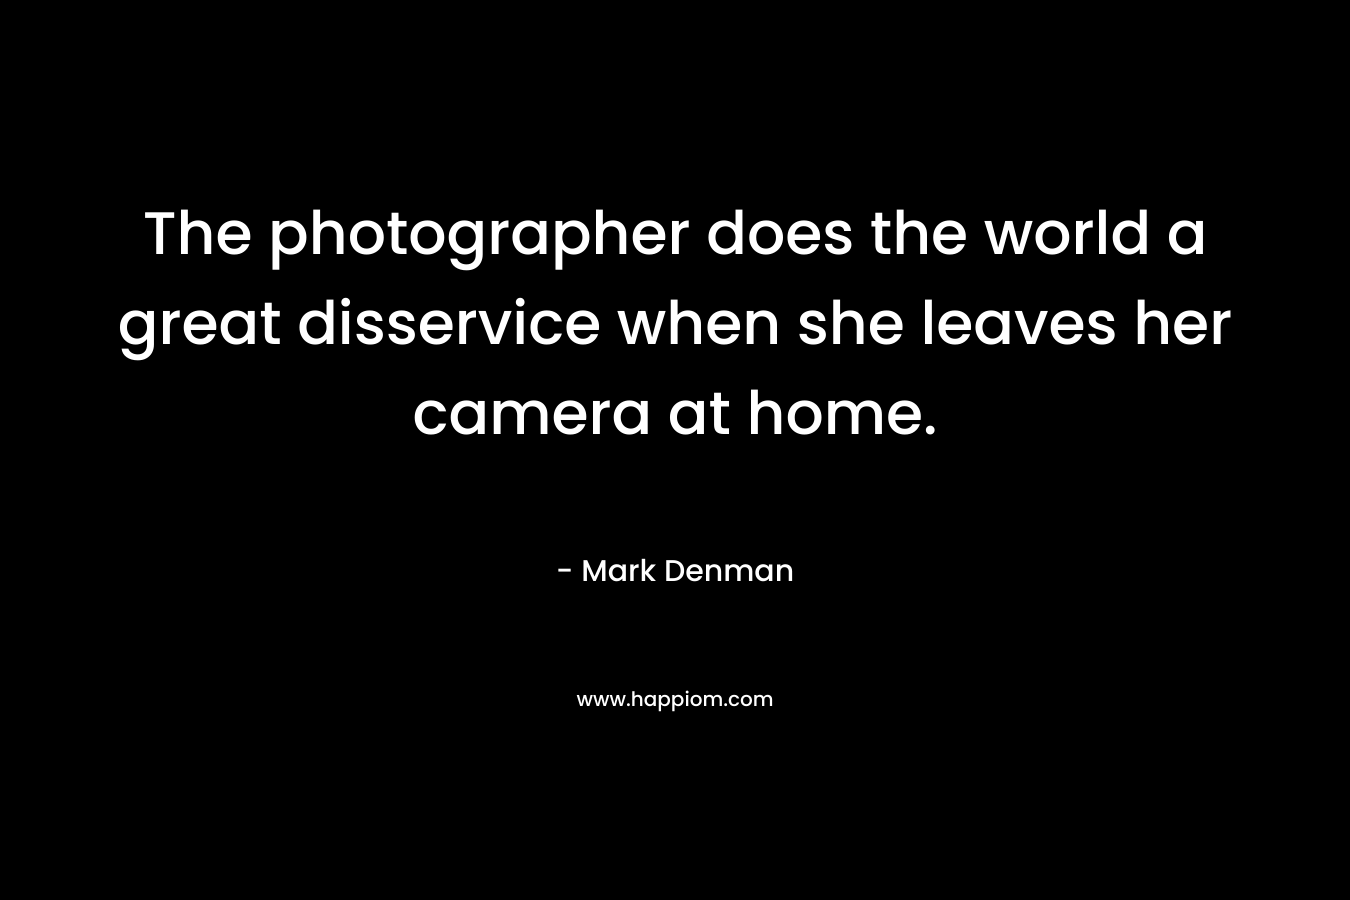 The photographer does the world a great disservice when she leaves her camera at home. – Mark Denman